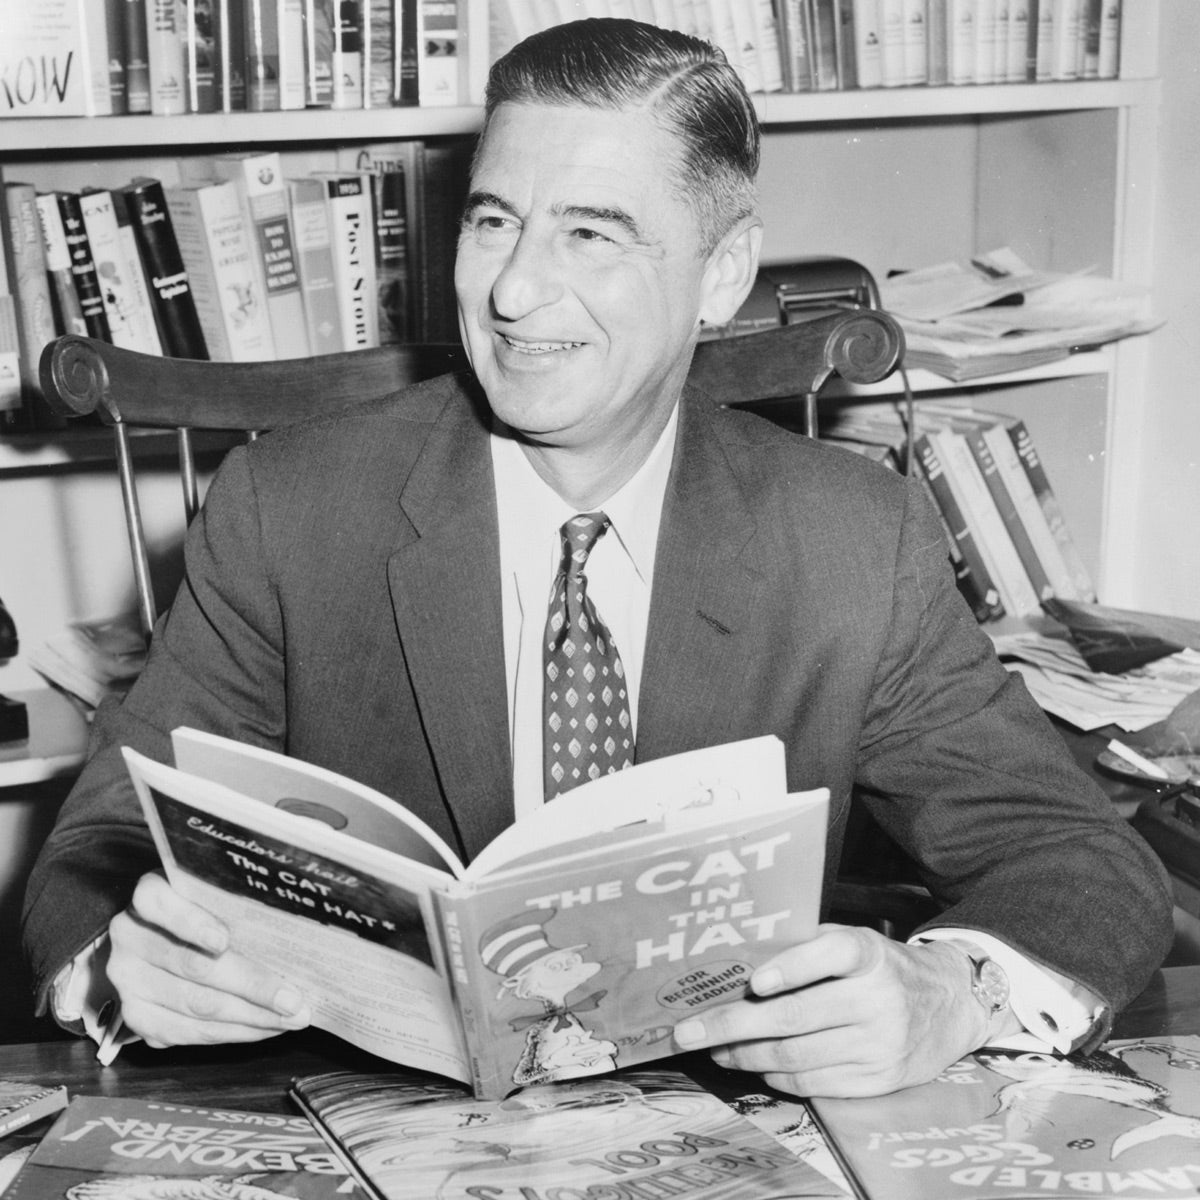 Geisel in his 50s smiling and holding a copy of The Cat in the Hat.